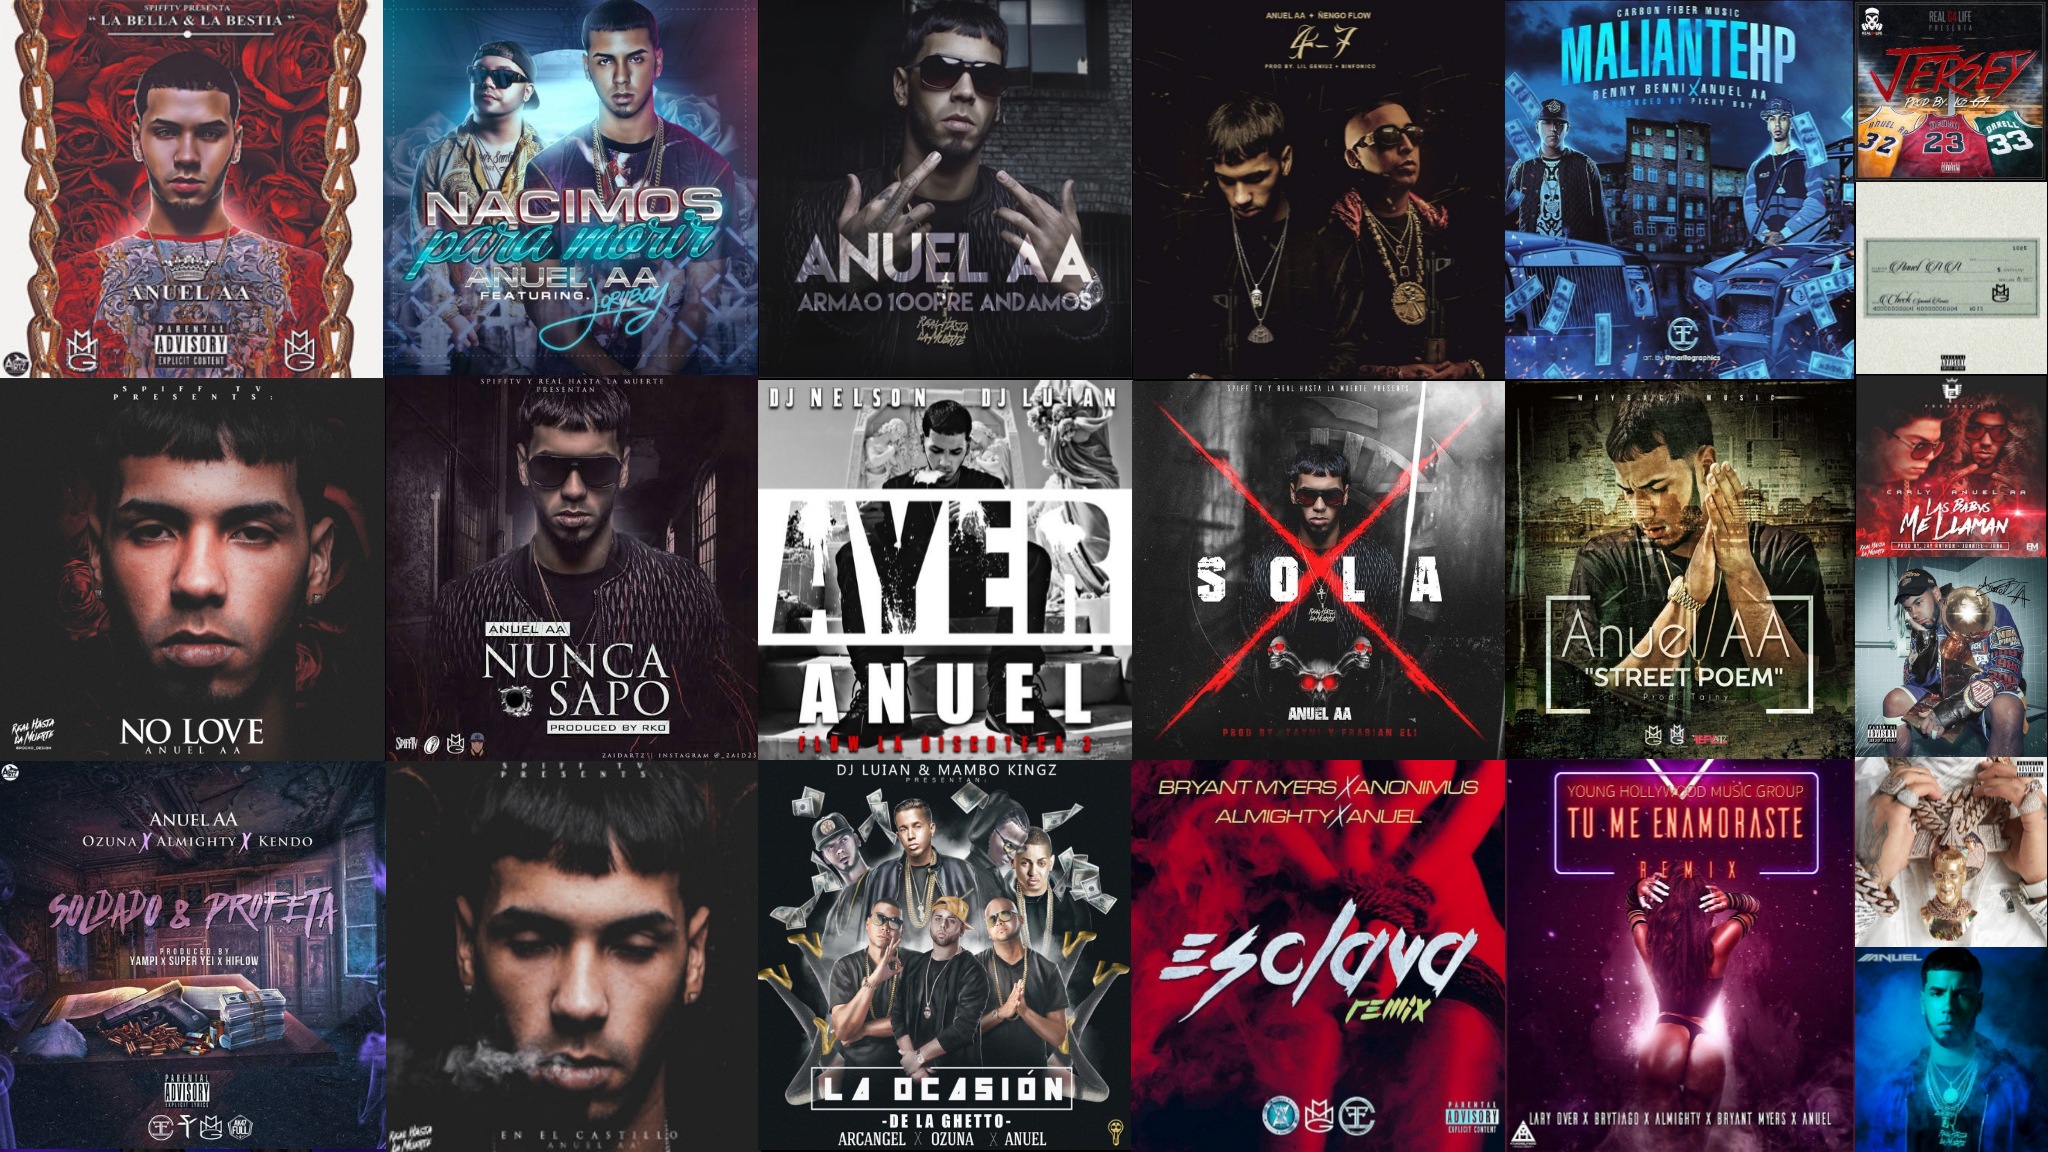 Anuel Aa Wallpapers 64 pictures